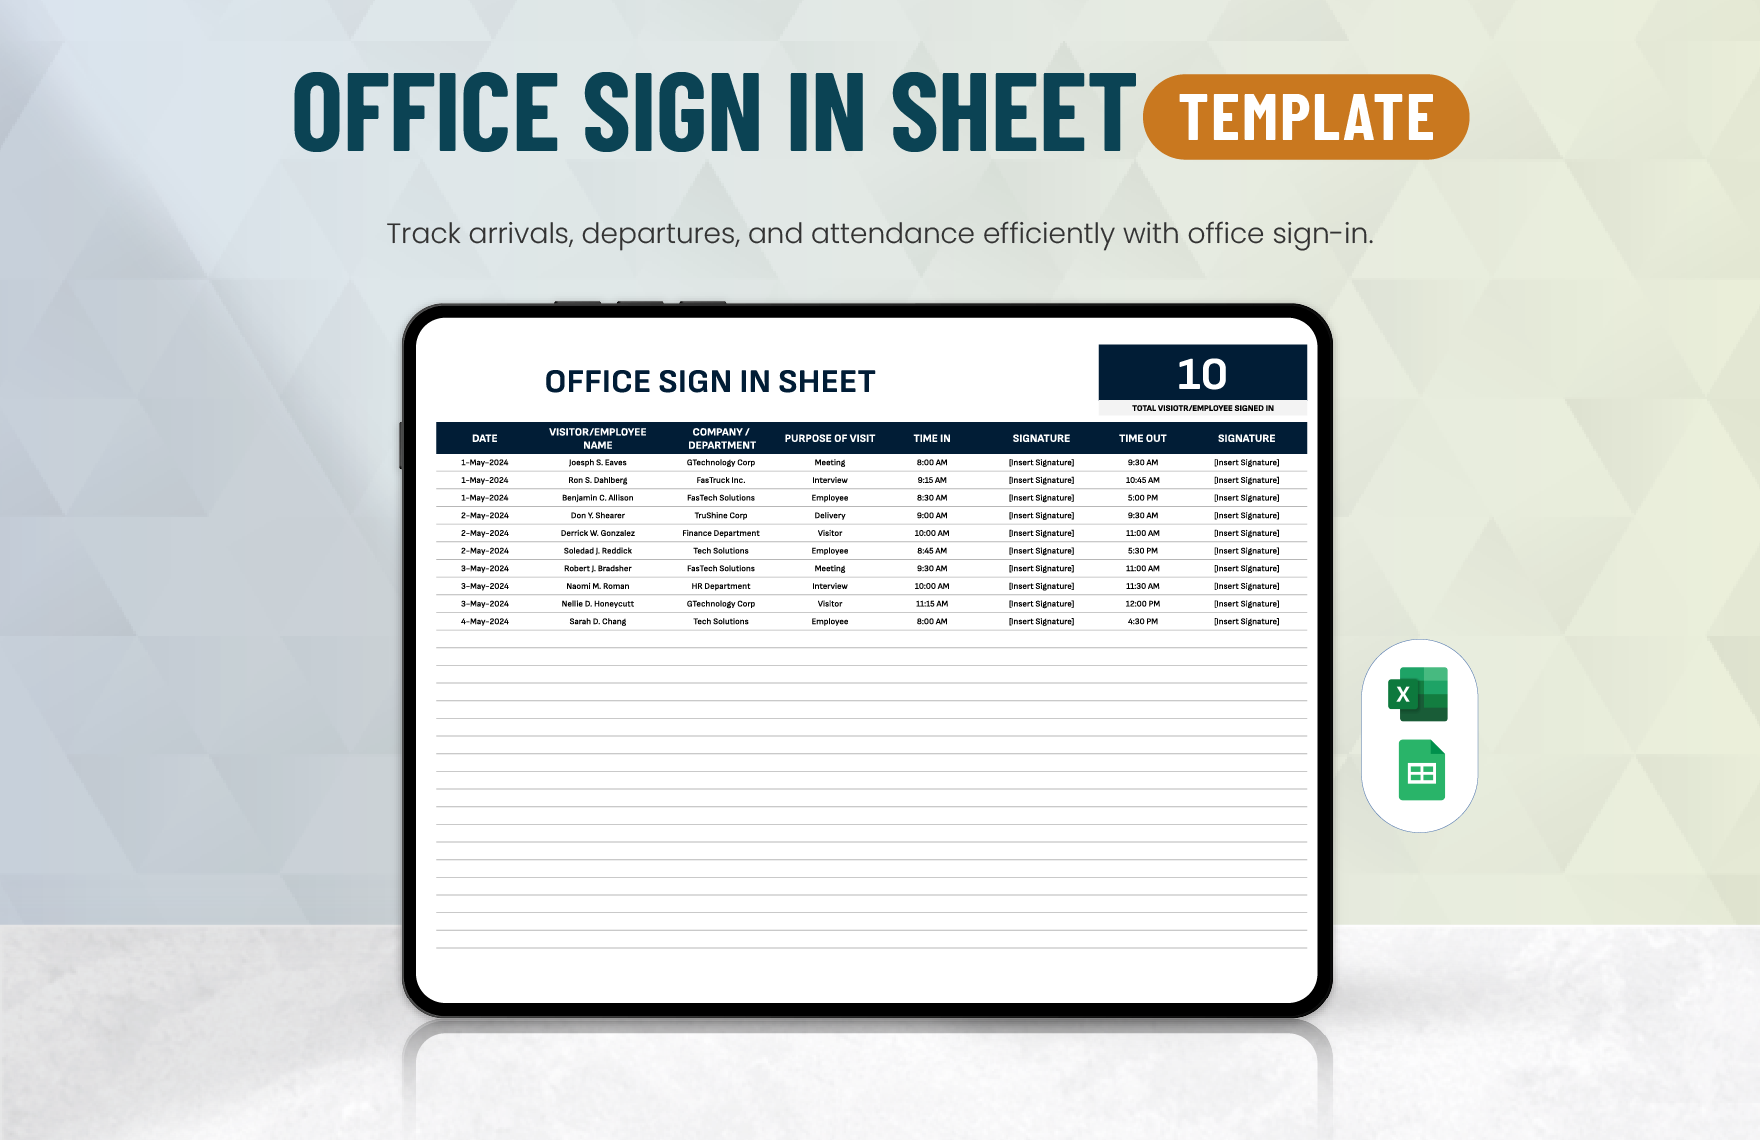 Office Sign in Sheet Template in Excel, Google Sheets